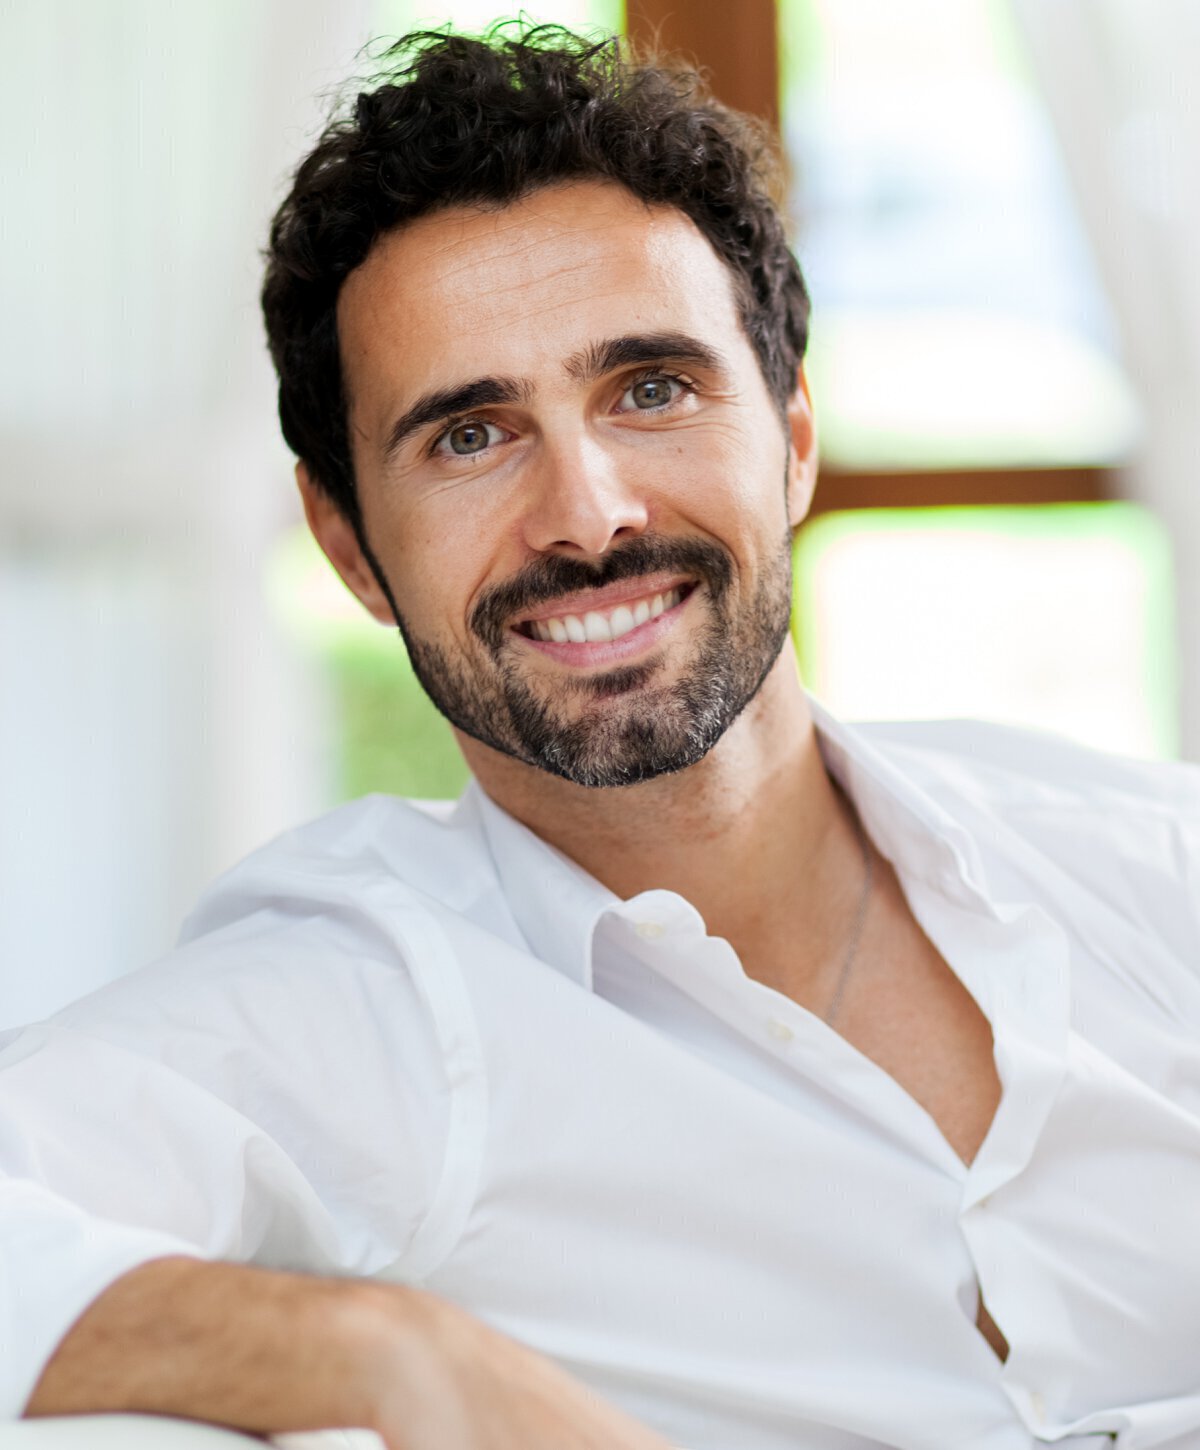 Man in white shirt sitting and smiling